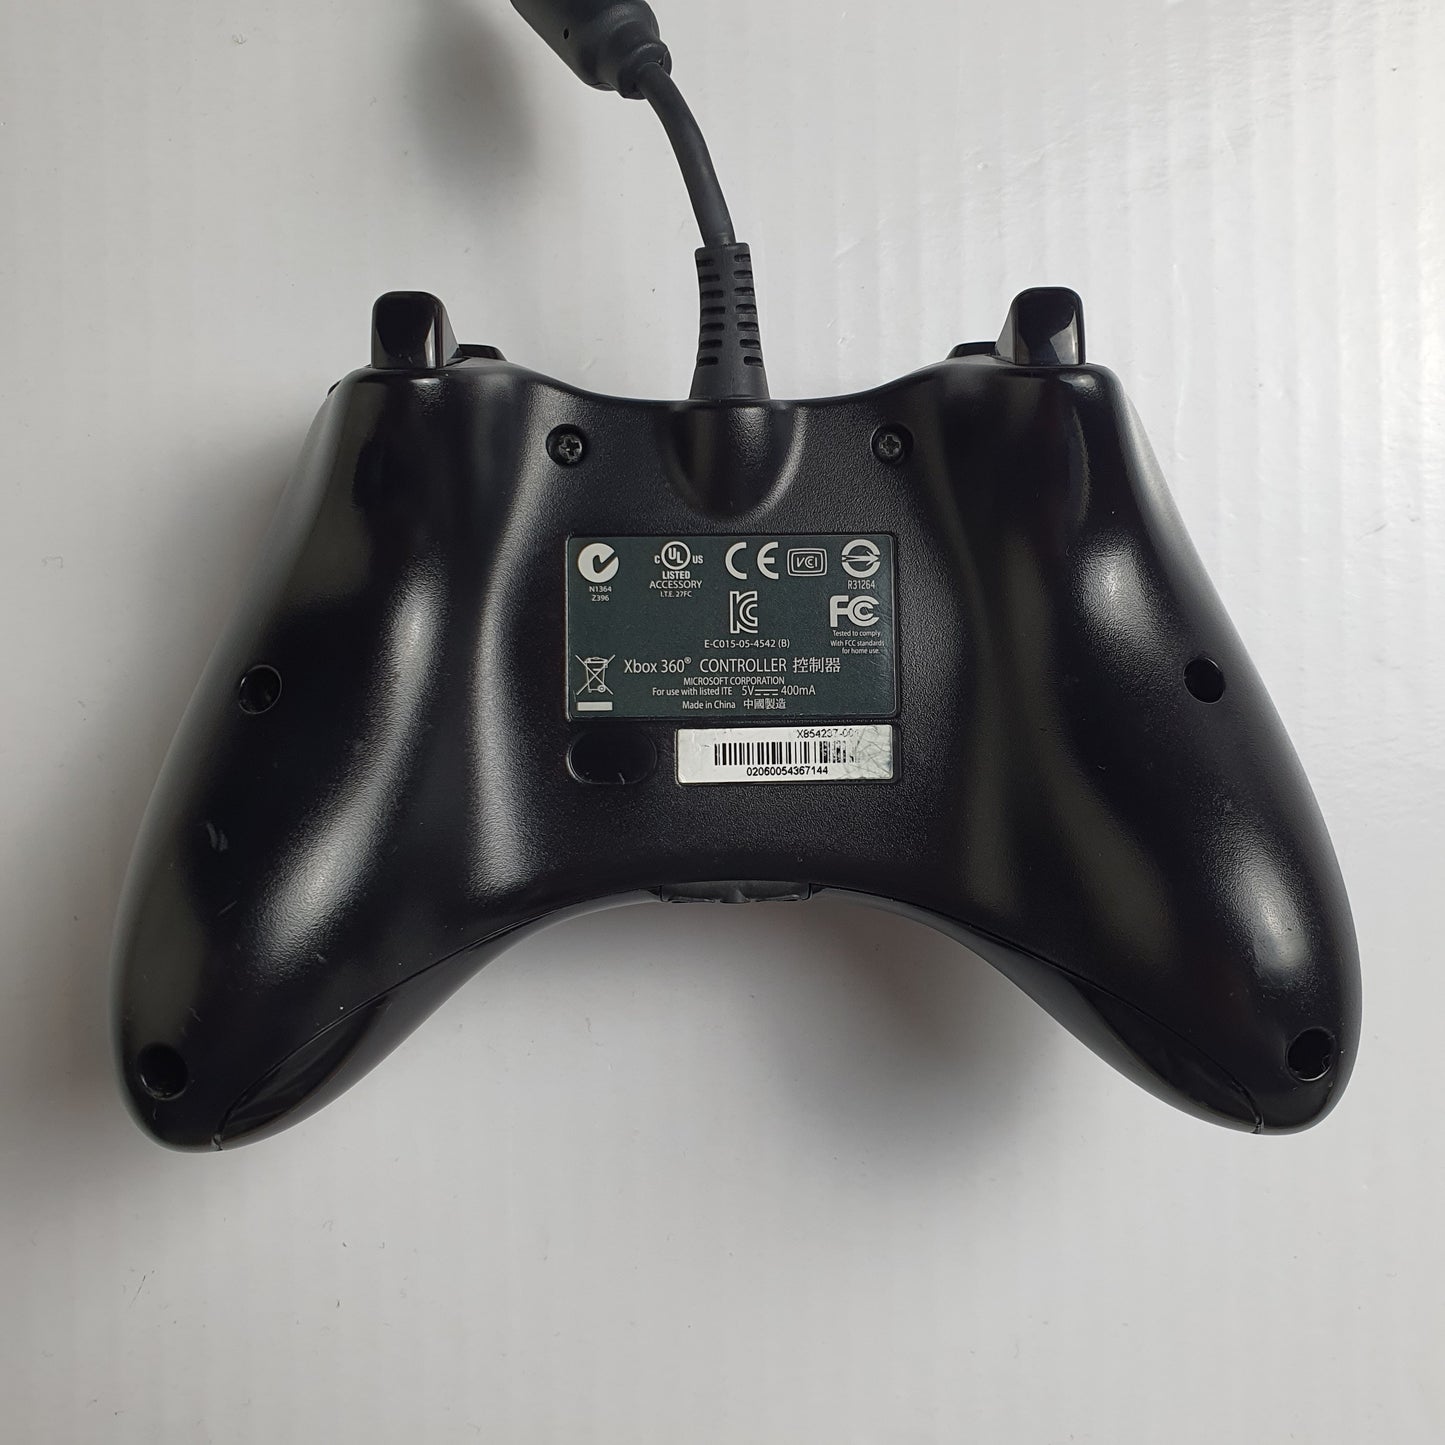 Official Microsoft Xbox 360 'S' Wired Black Controller w/ Breakaway Cable